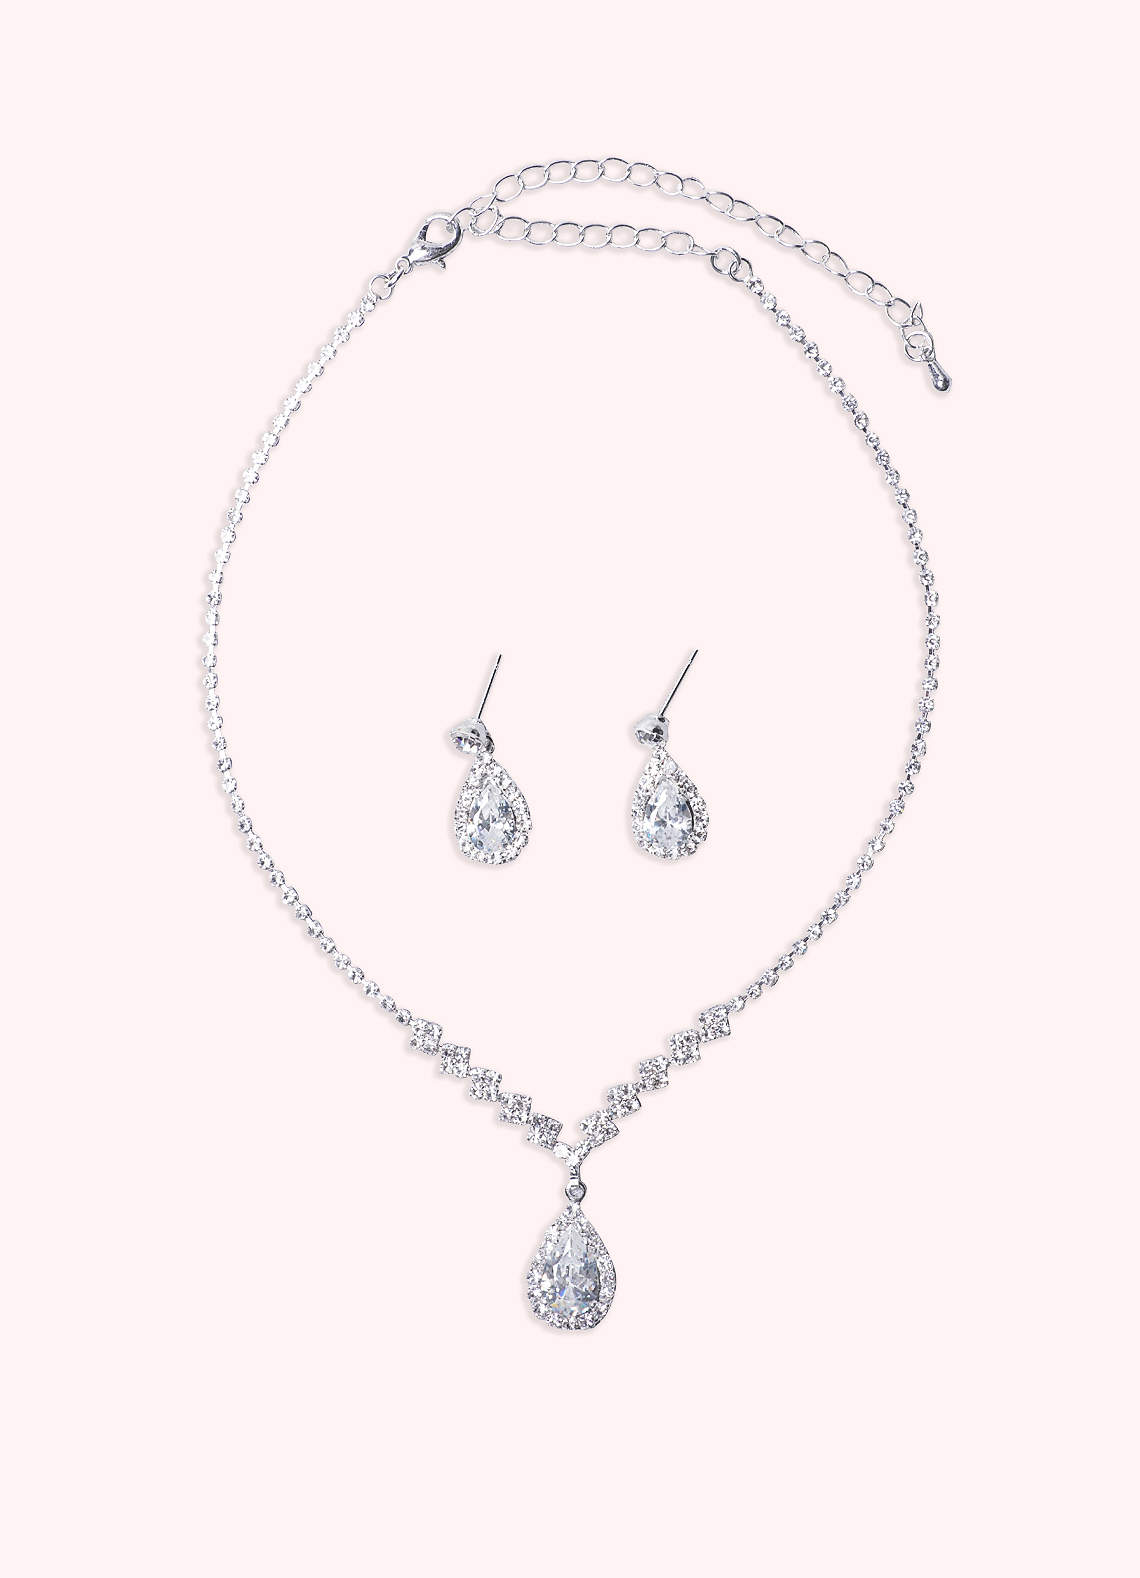 Pearl and Diamante Wedding Jewellery Set Sterling Silver Teardrop Pearl  Diamond Pendant Bridal Jewelry Set Necklace Earrings Bridesmaid Gift - Etsy